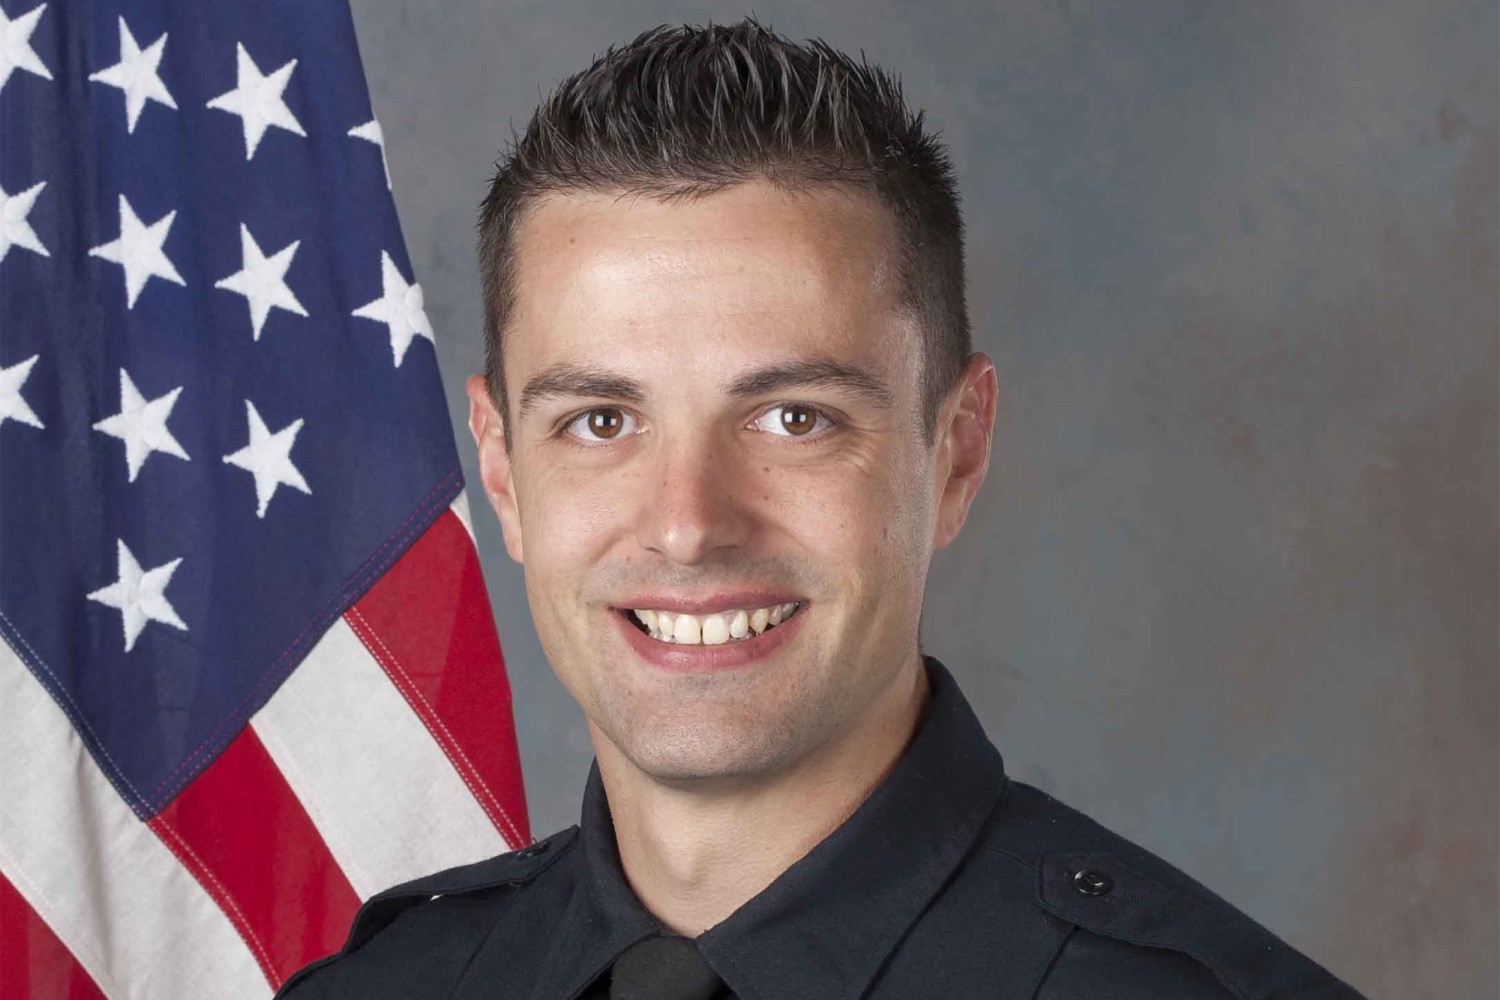 A former Arizona officer was indicted after fatally shooting a man in a  wheelchair